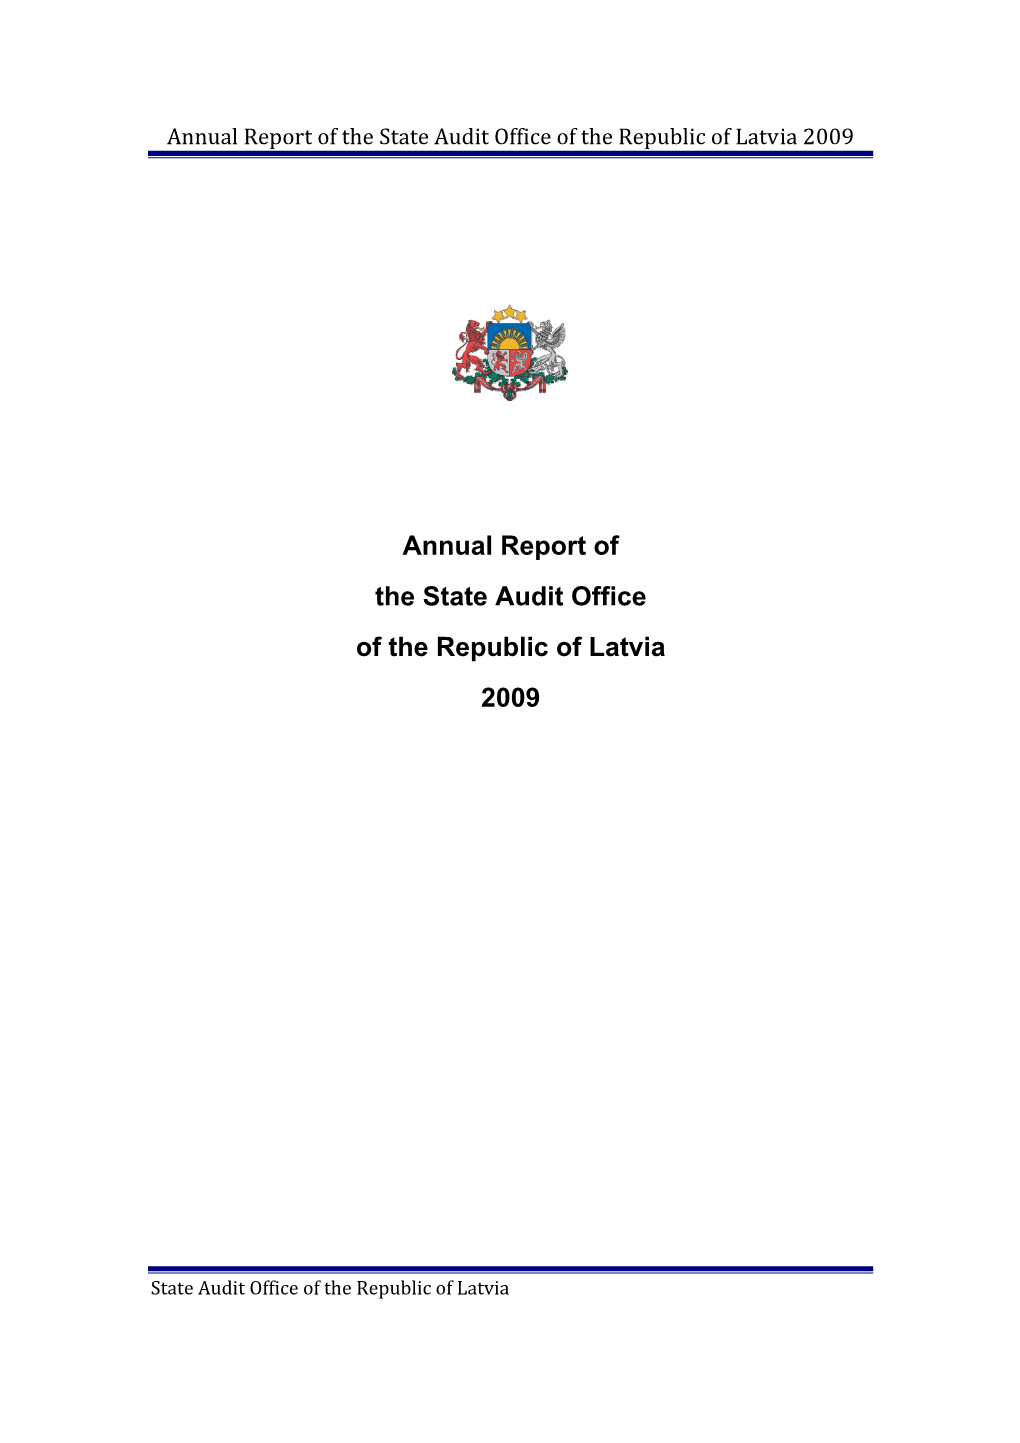 Annual Report of the State Audit Office of the Republic of Latvia 2009